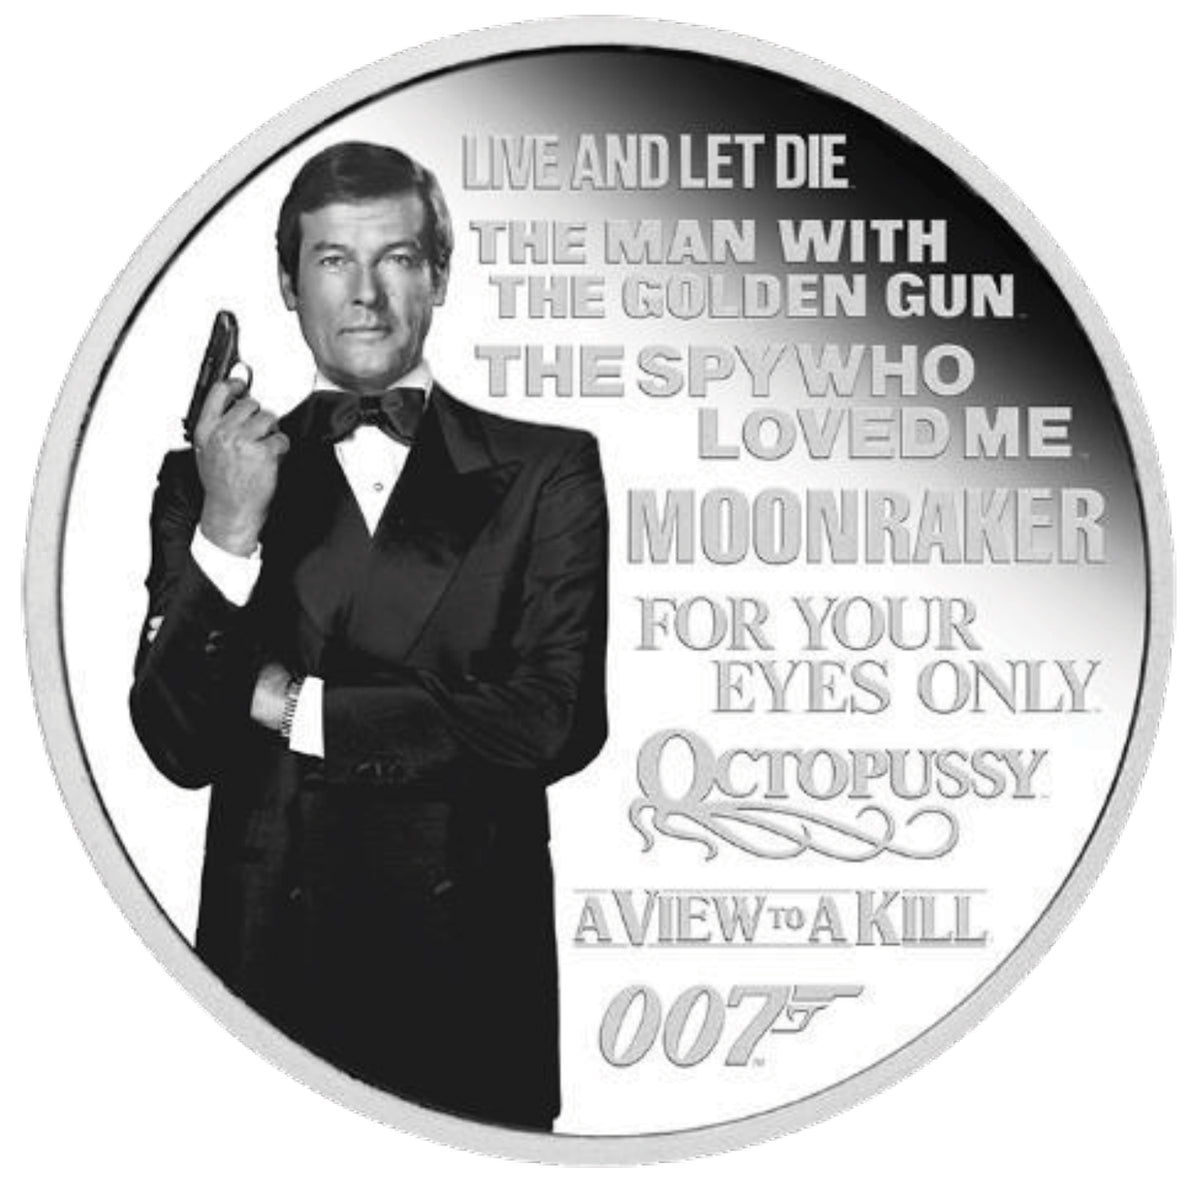 James Bond Roger Moore 1oz Silver Proof Coin - Numbered Edition - By The Perth Mint